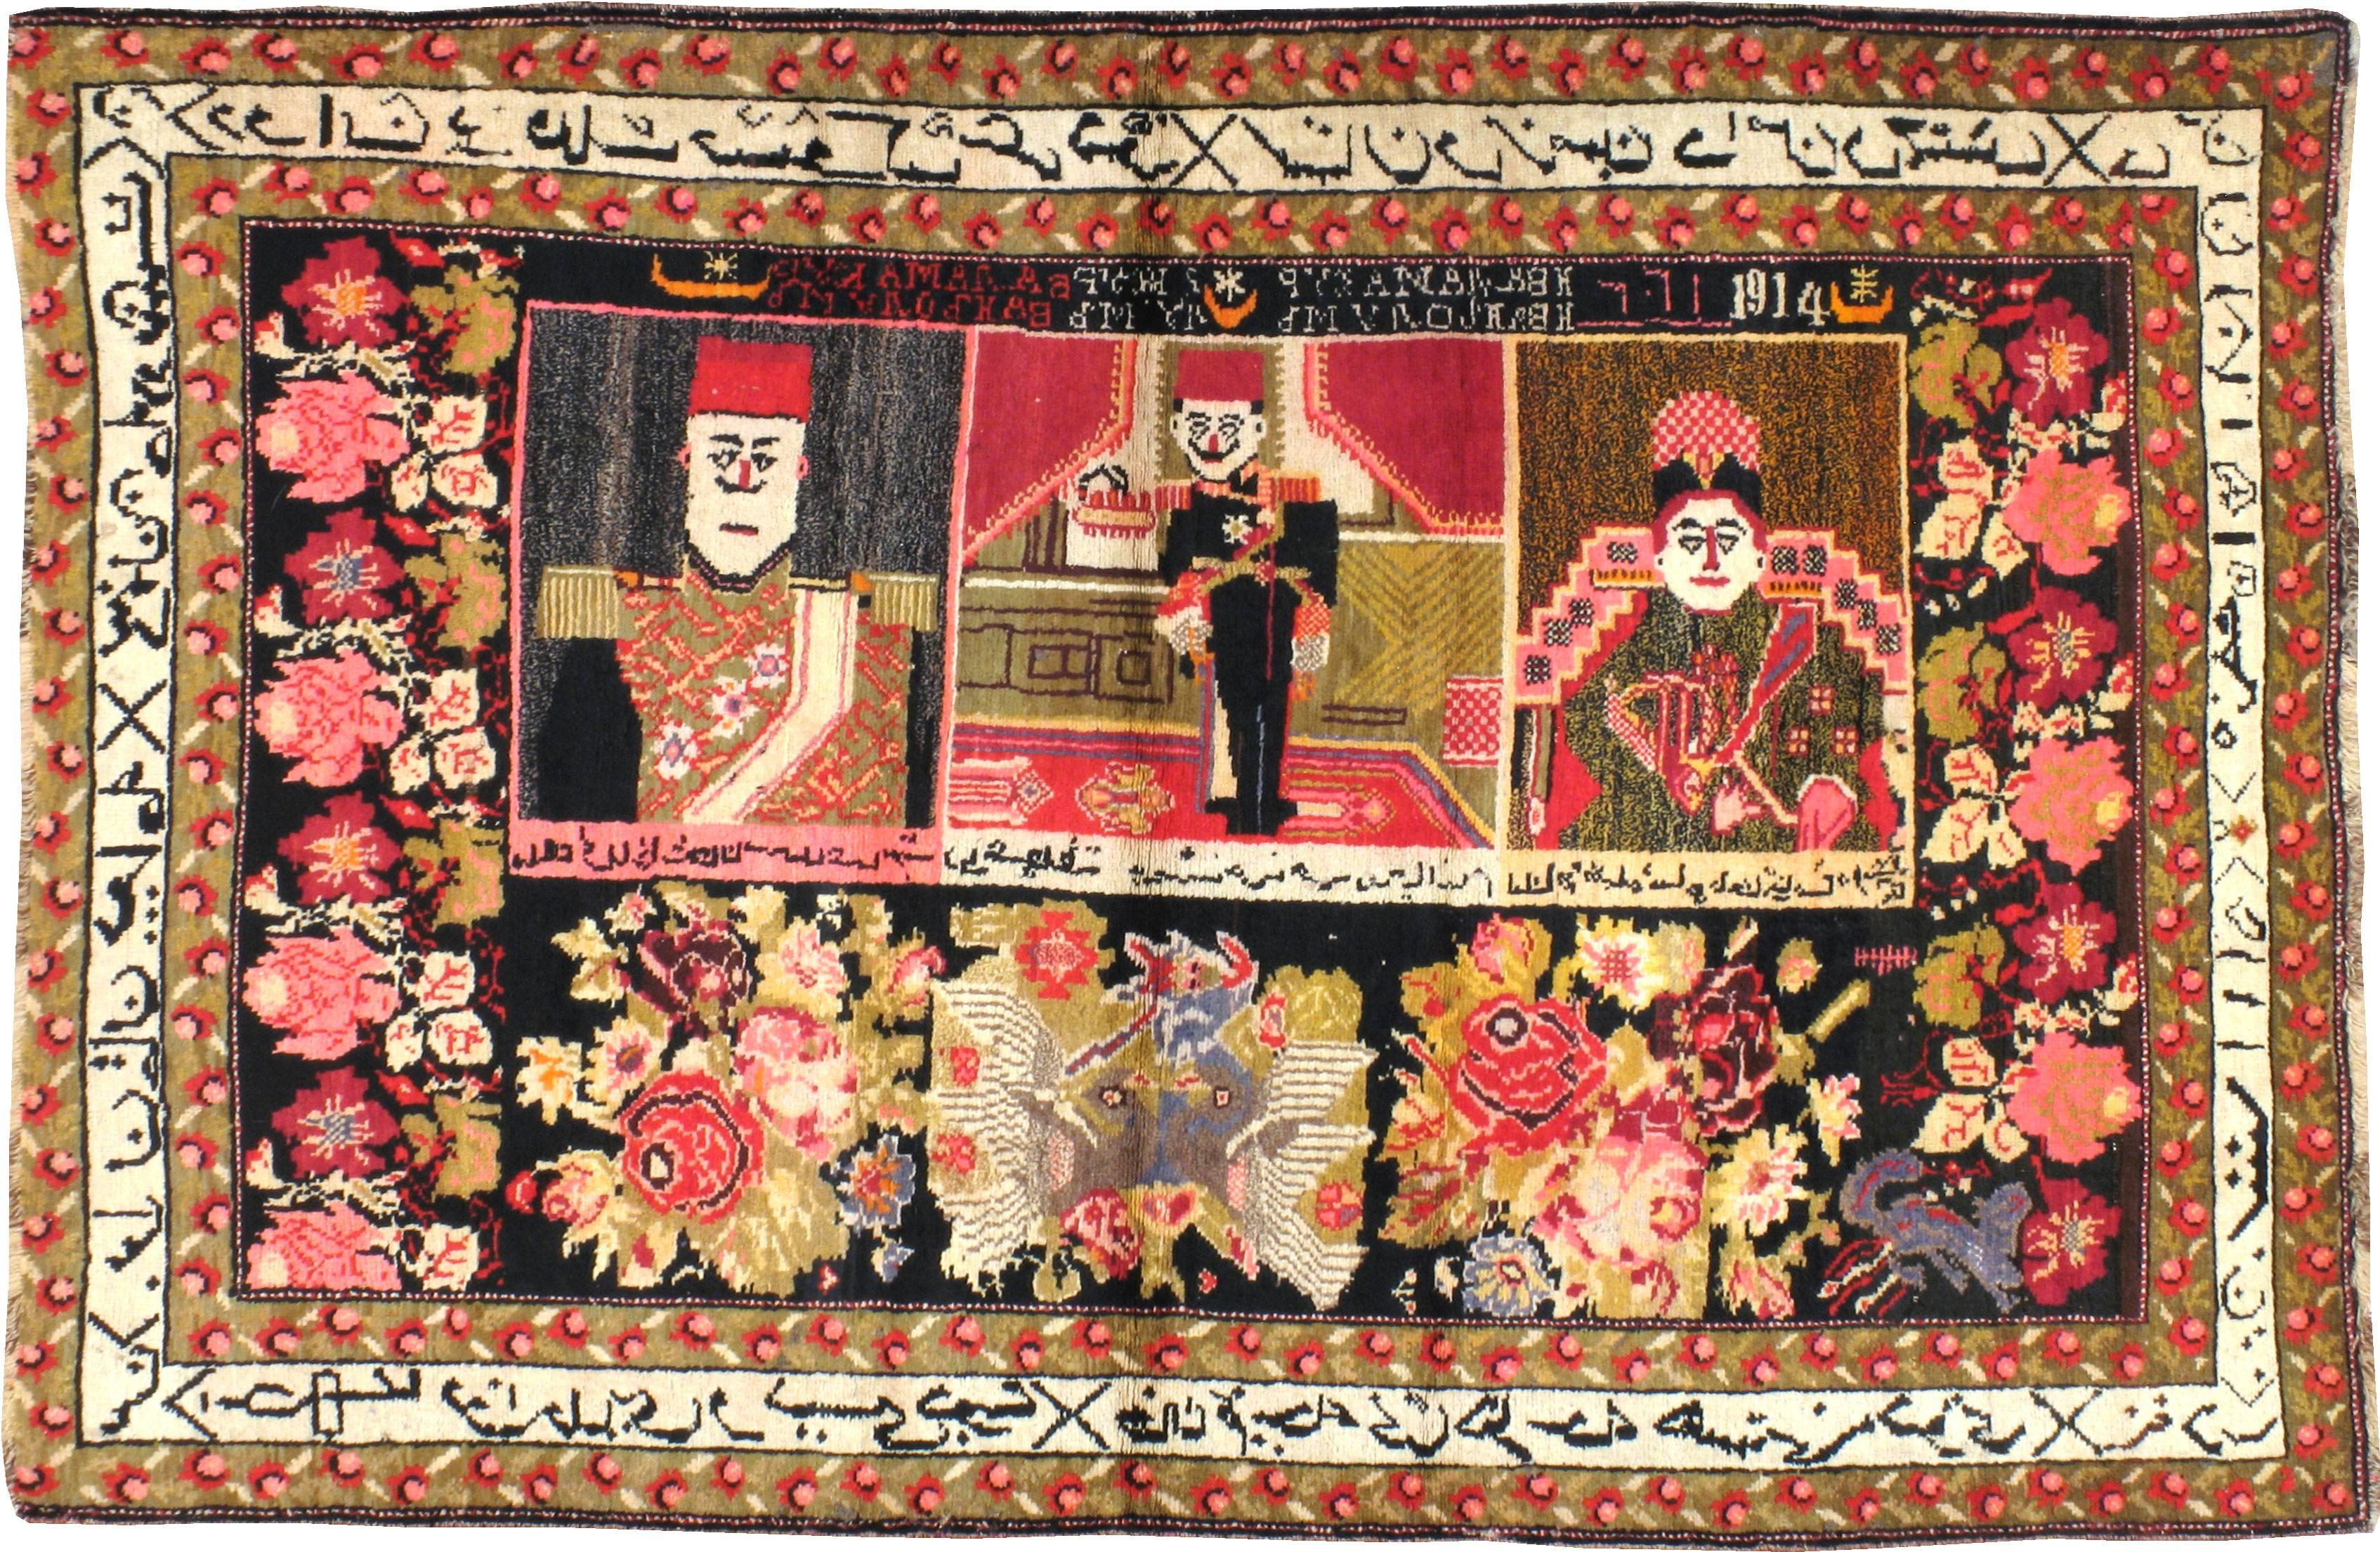 An antique Russian Karabagh carpet from the first quarter of the 20th century with a pictorial design.